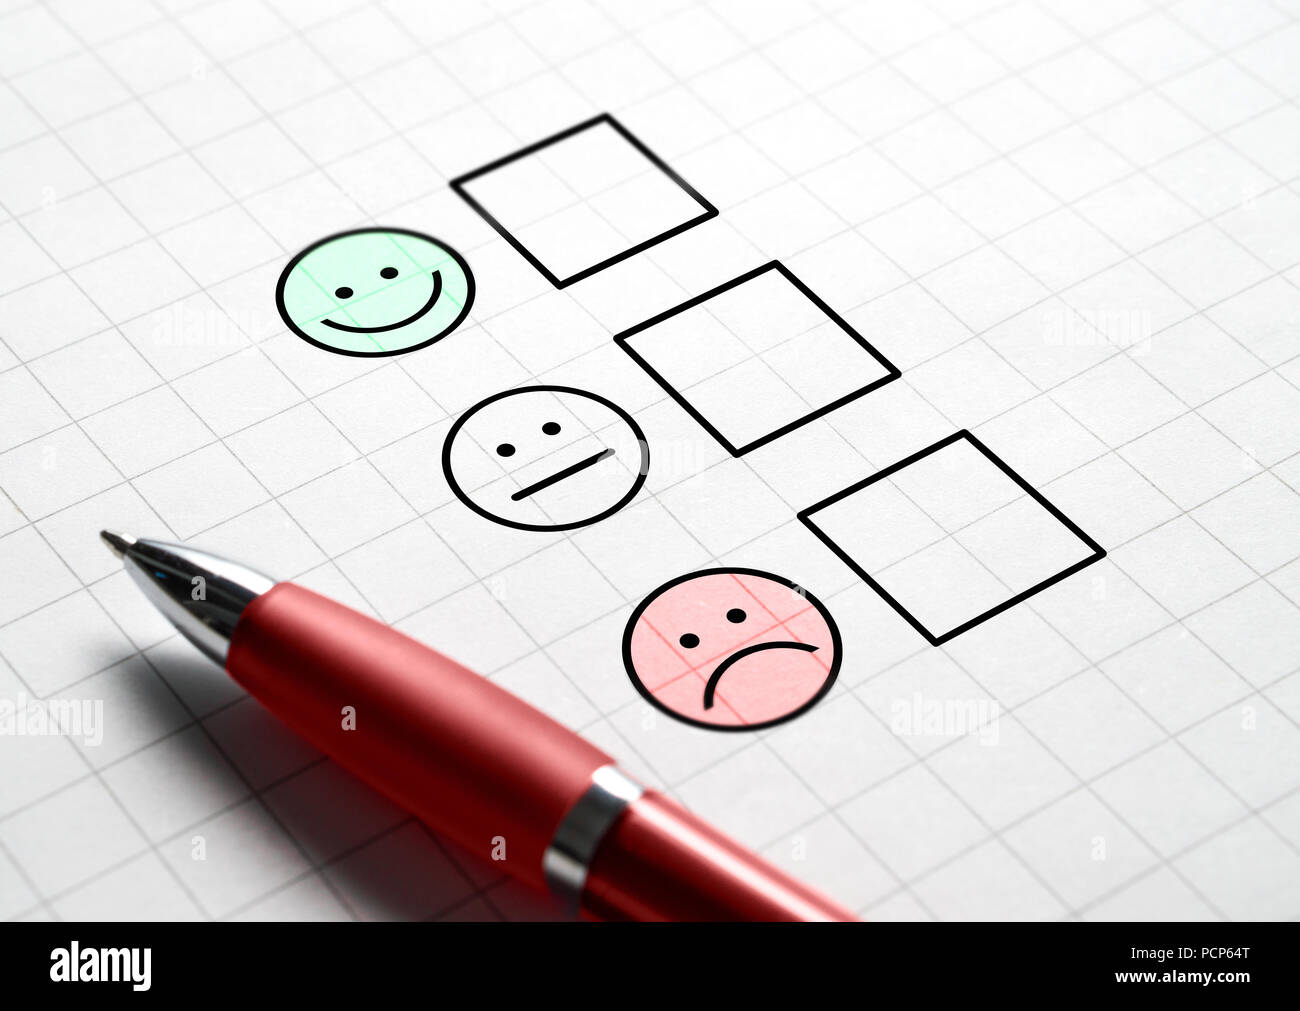 Customer satisfaction survey and questionnaire concept. Giving feedback with multiple choice form. Pen, paper and emotion smiley face icons. Stock Photo